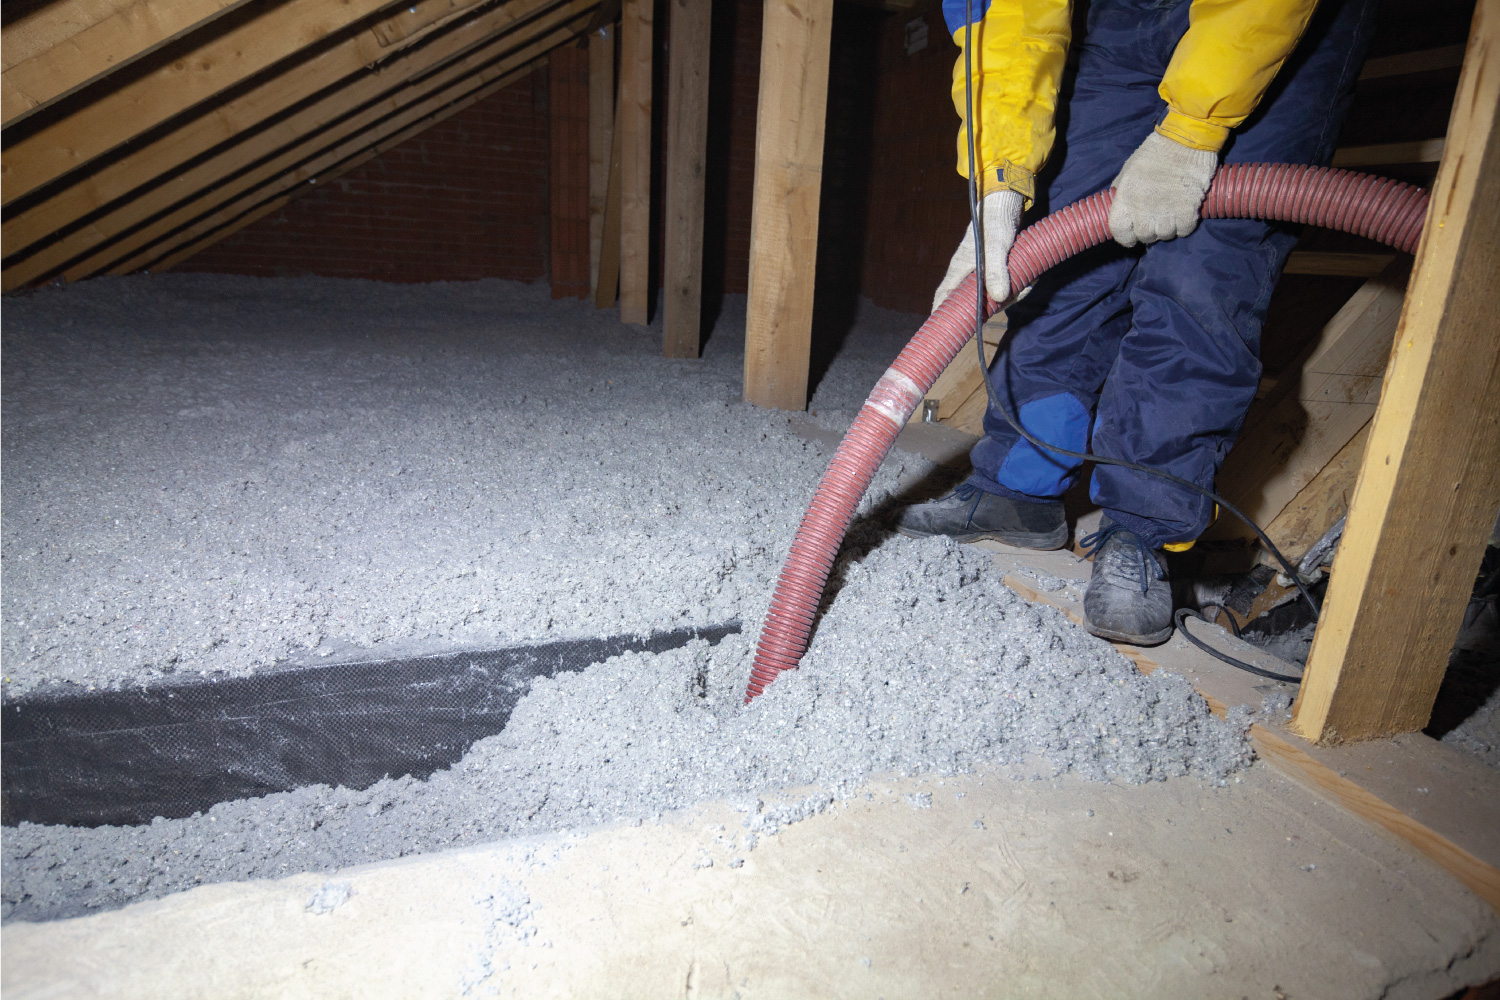 Spraying cellulose insulation in the attic of a house. Insulation of the attic or floor in the house